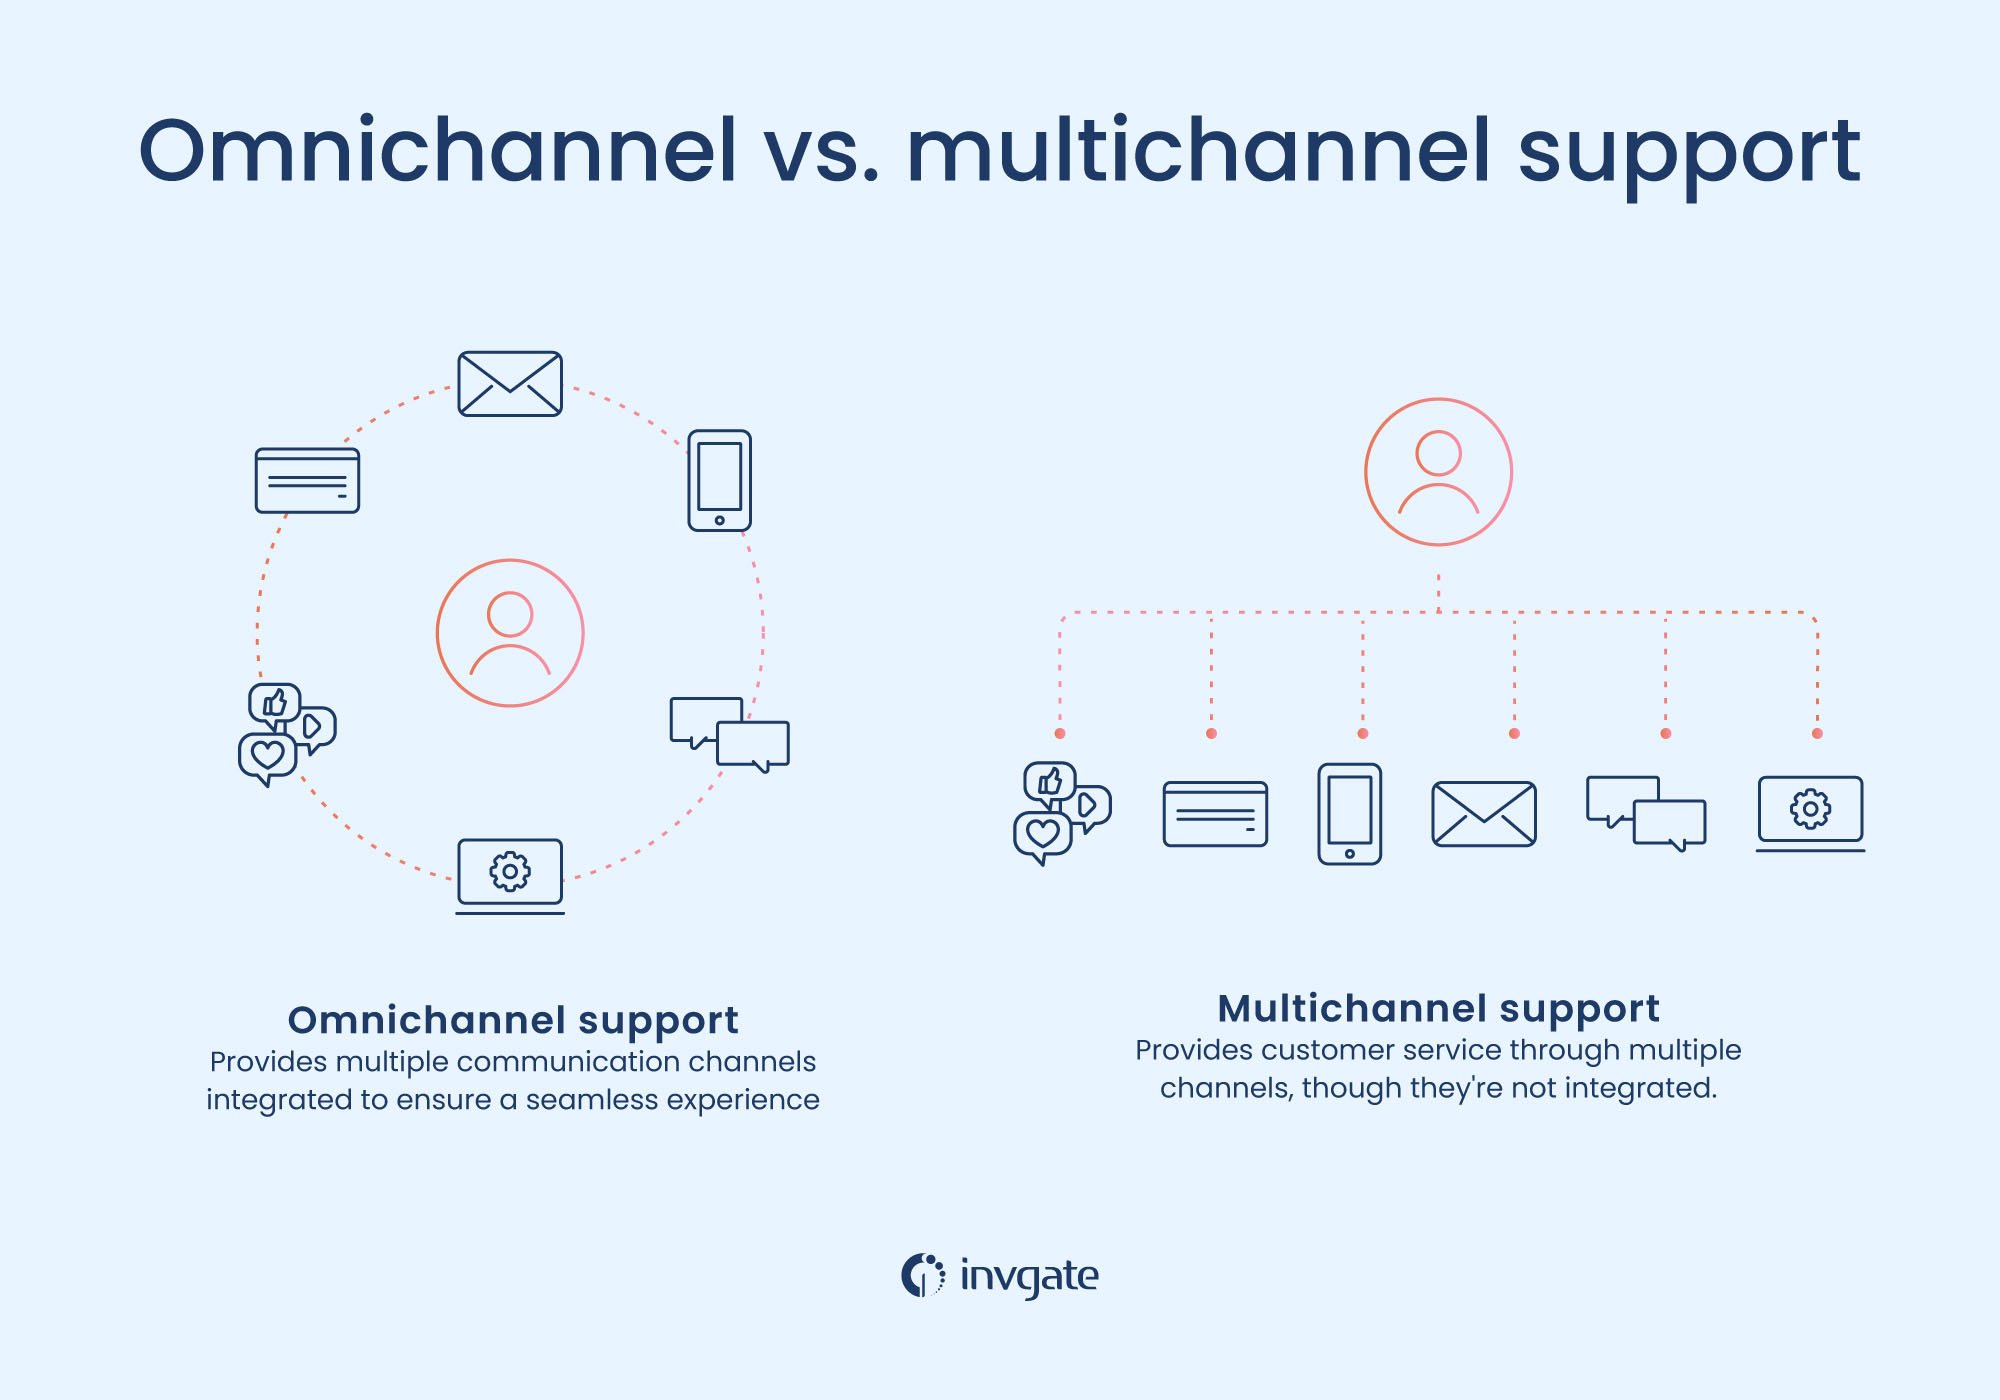 Multichannel support refers to providing customer service through multiple channels, though not necessarily at the same time or as a seamless experience. Omnichannel support improves upon this by ensuring that customers can switch between channels with ease while still receiving the same level of customer service.